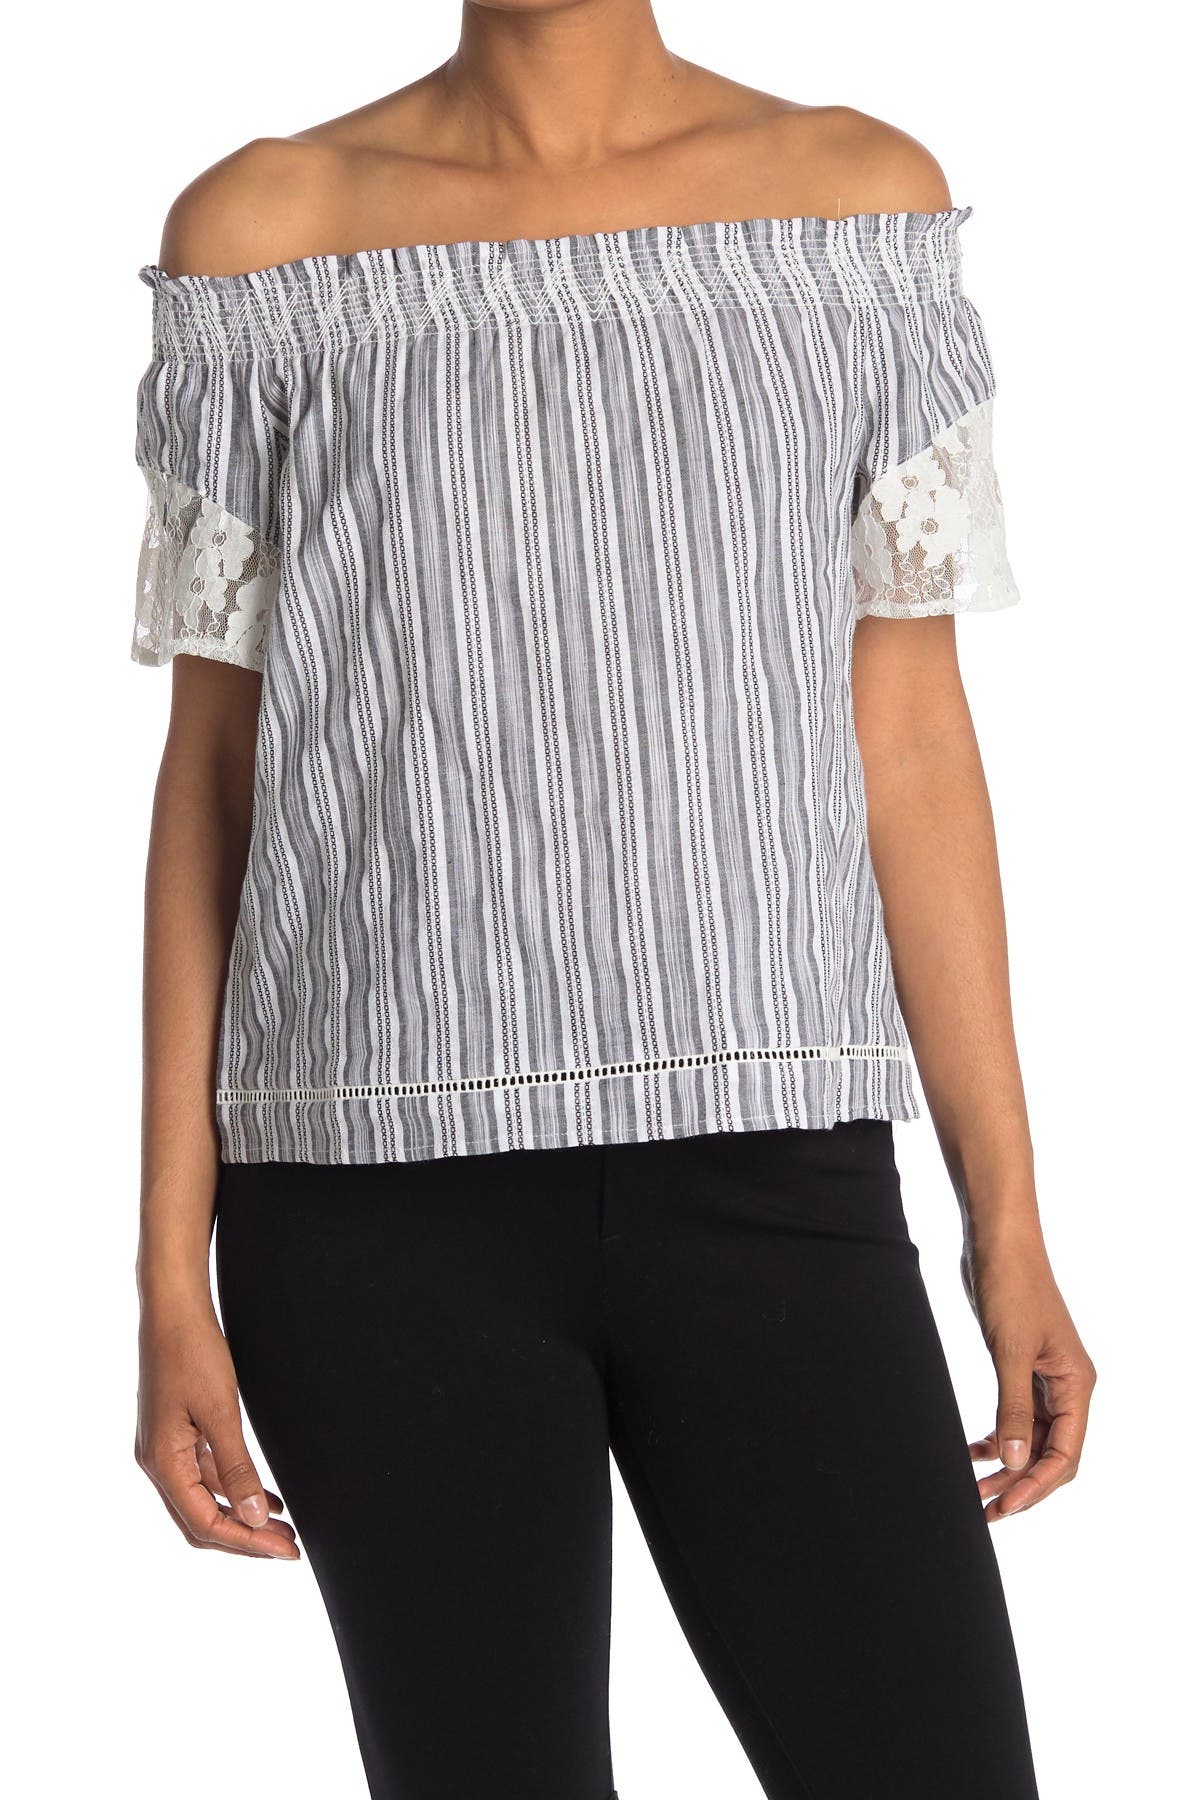 Laundry By Shelli Segal Stripe Off-the-shoulder Lace Top In Open White9